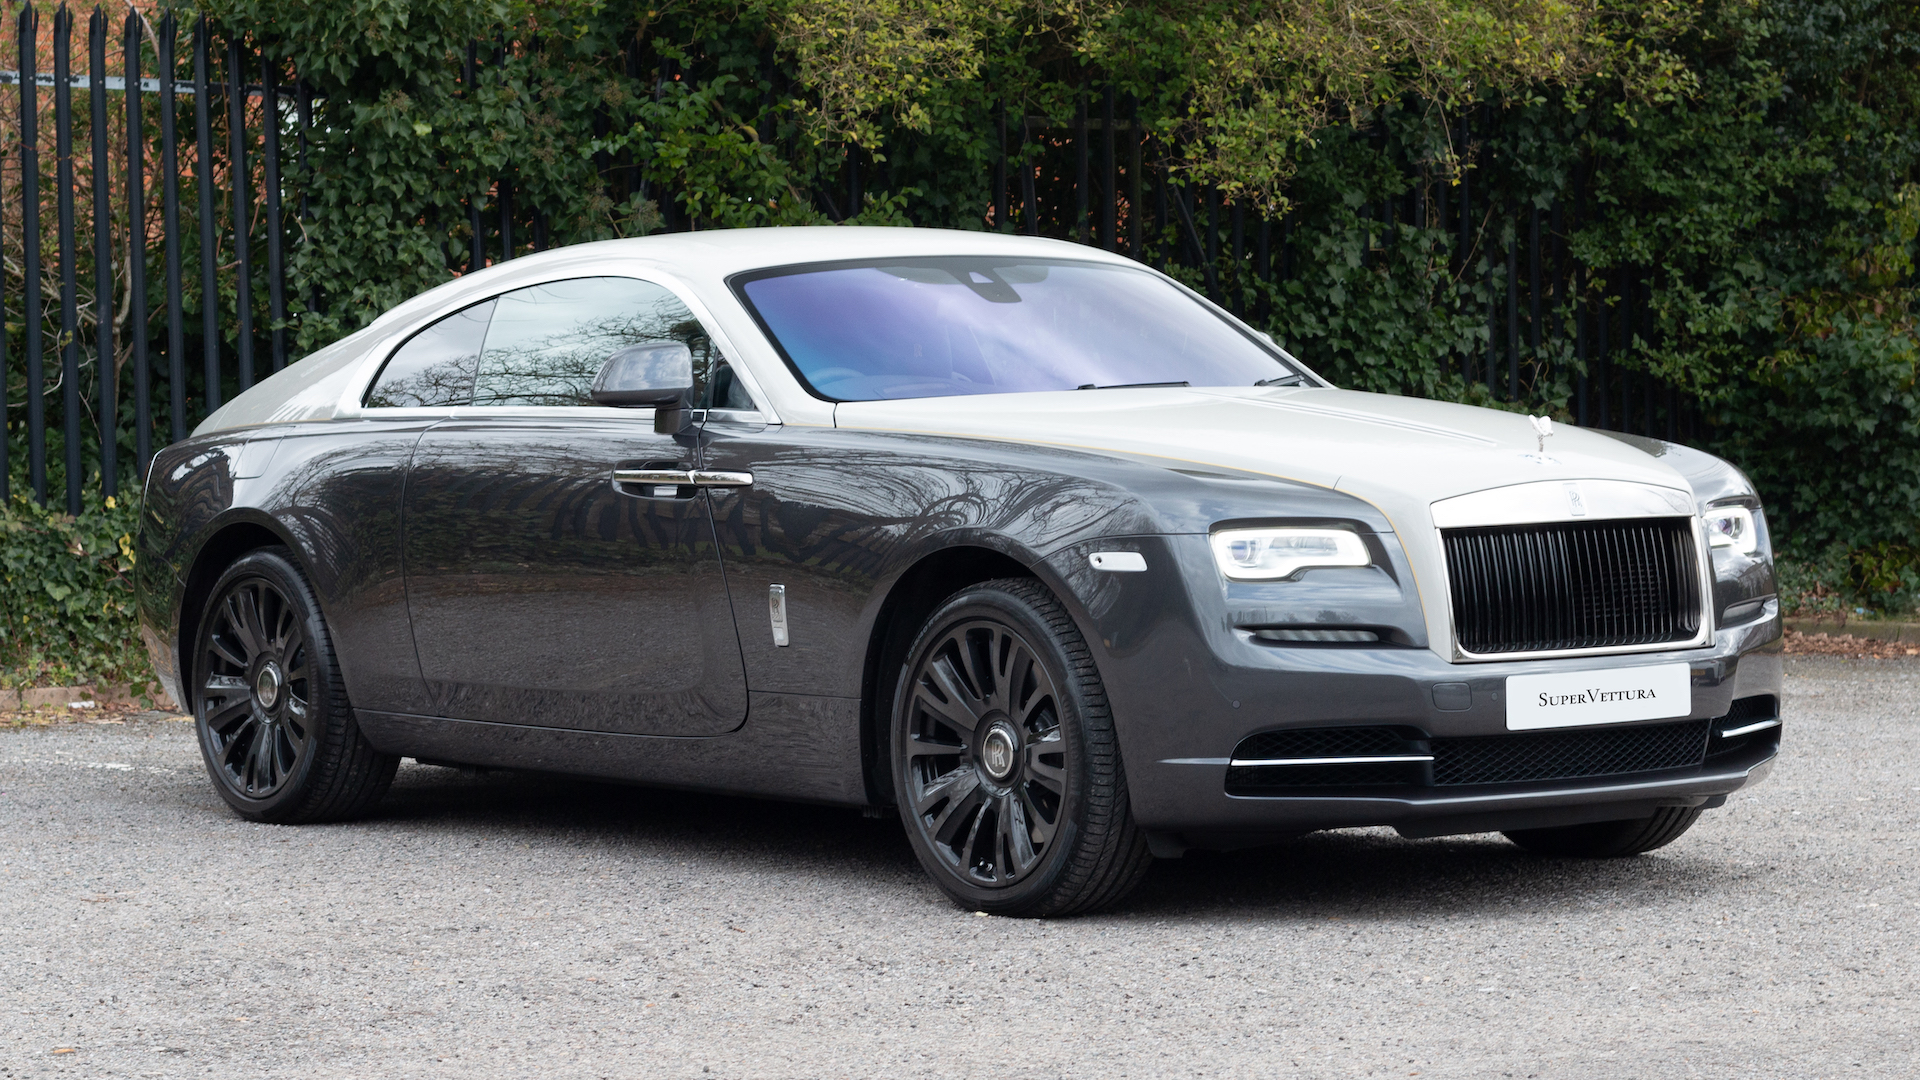 This Rolls Royce Wraith Pays Homage To The SpaFrancorchamps Circuit   Carscoops